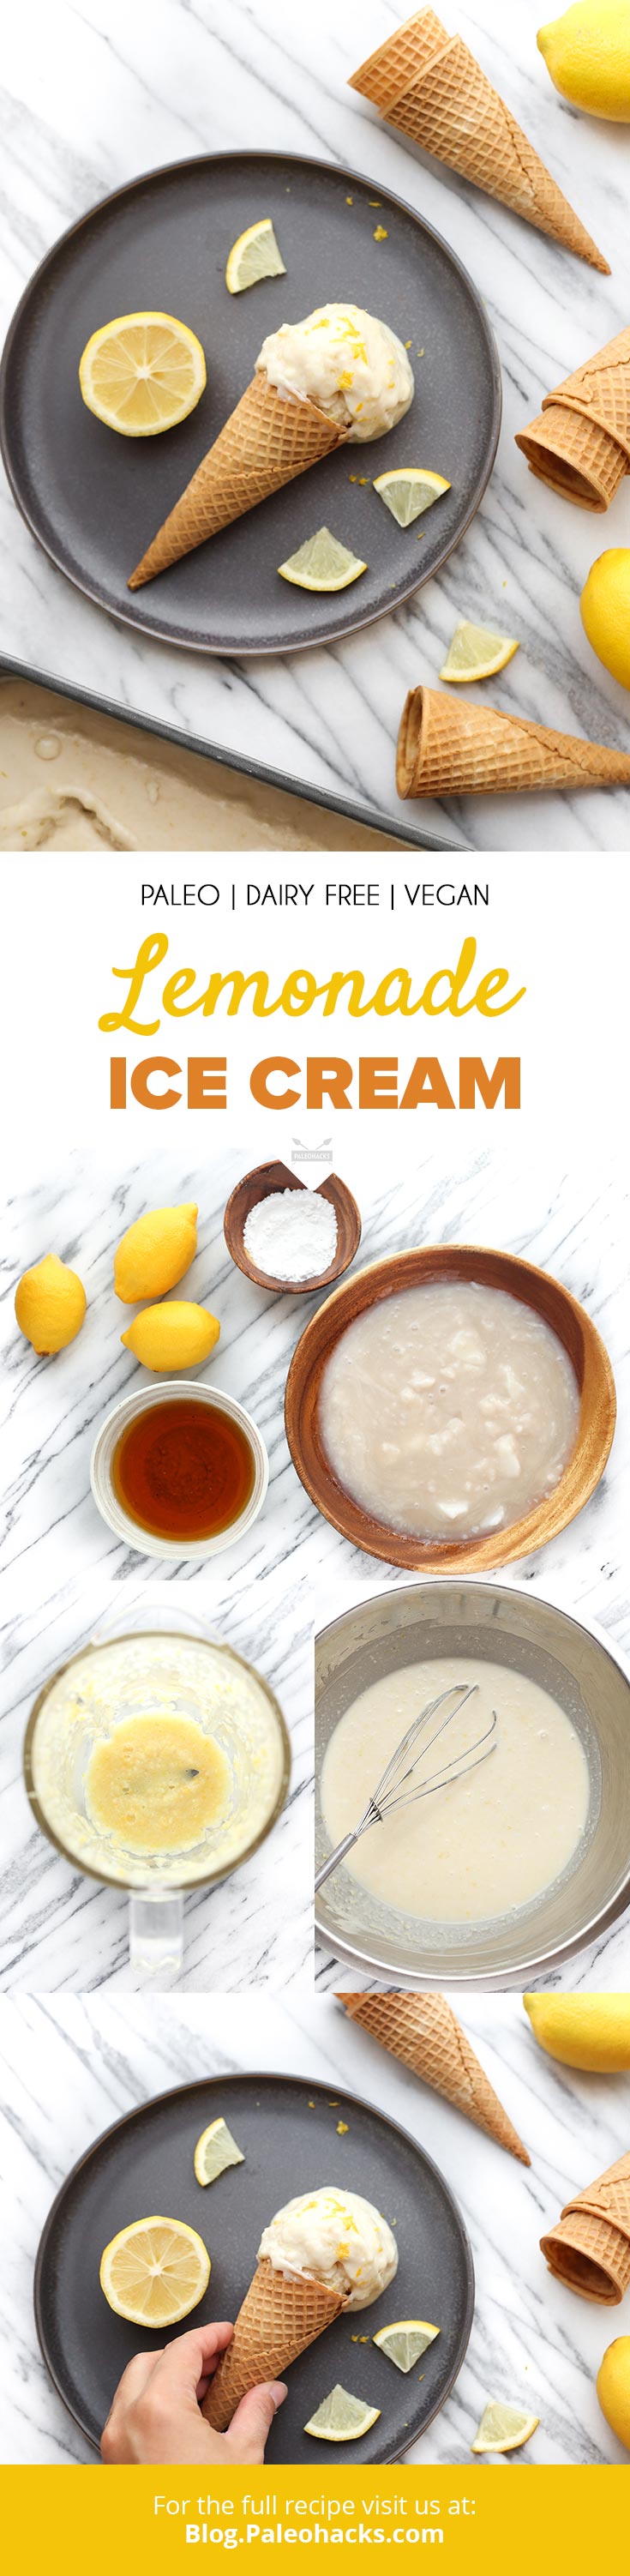 This dairy-free Lemonade Ice Cream is the refreshing treat your tastebuds deserve. Guaranteed to be your new warm-weather favorite.